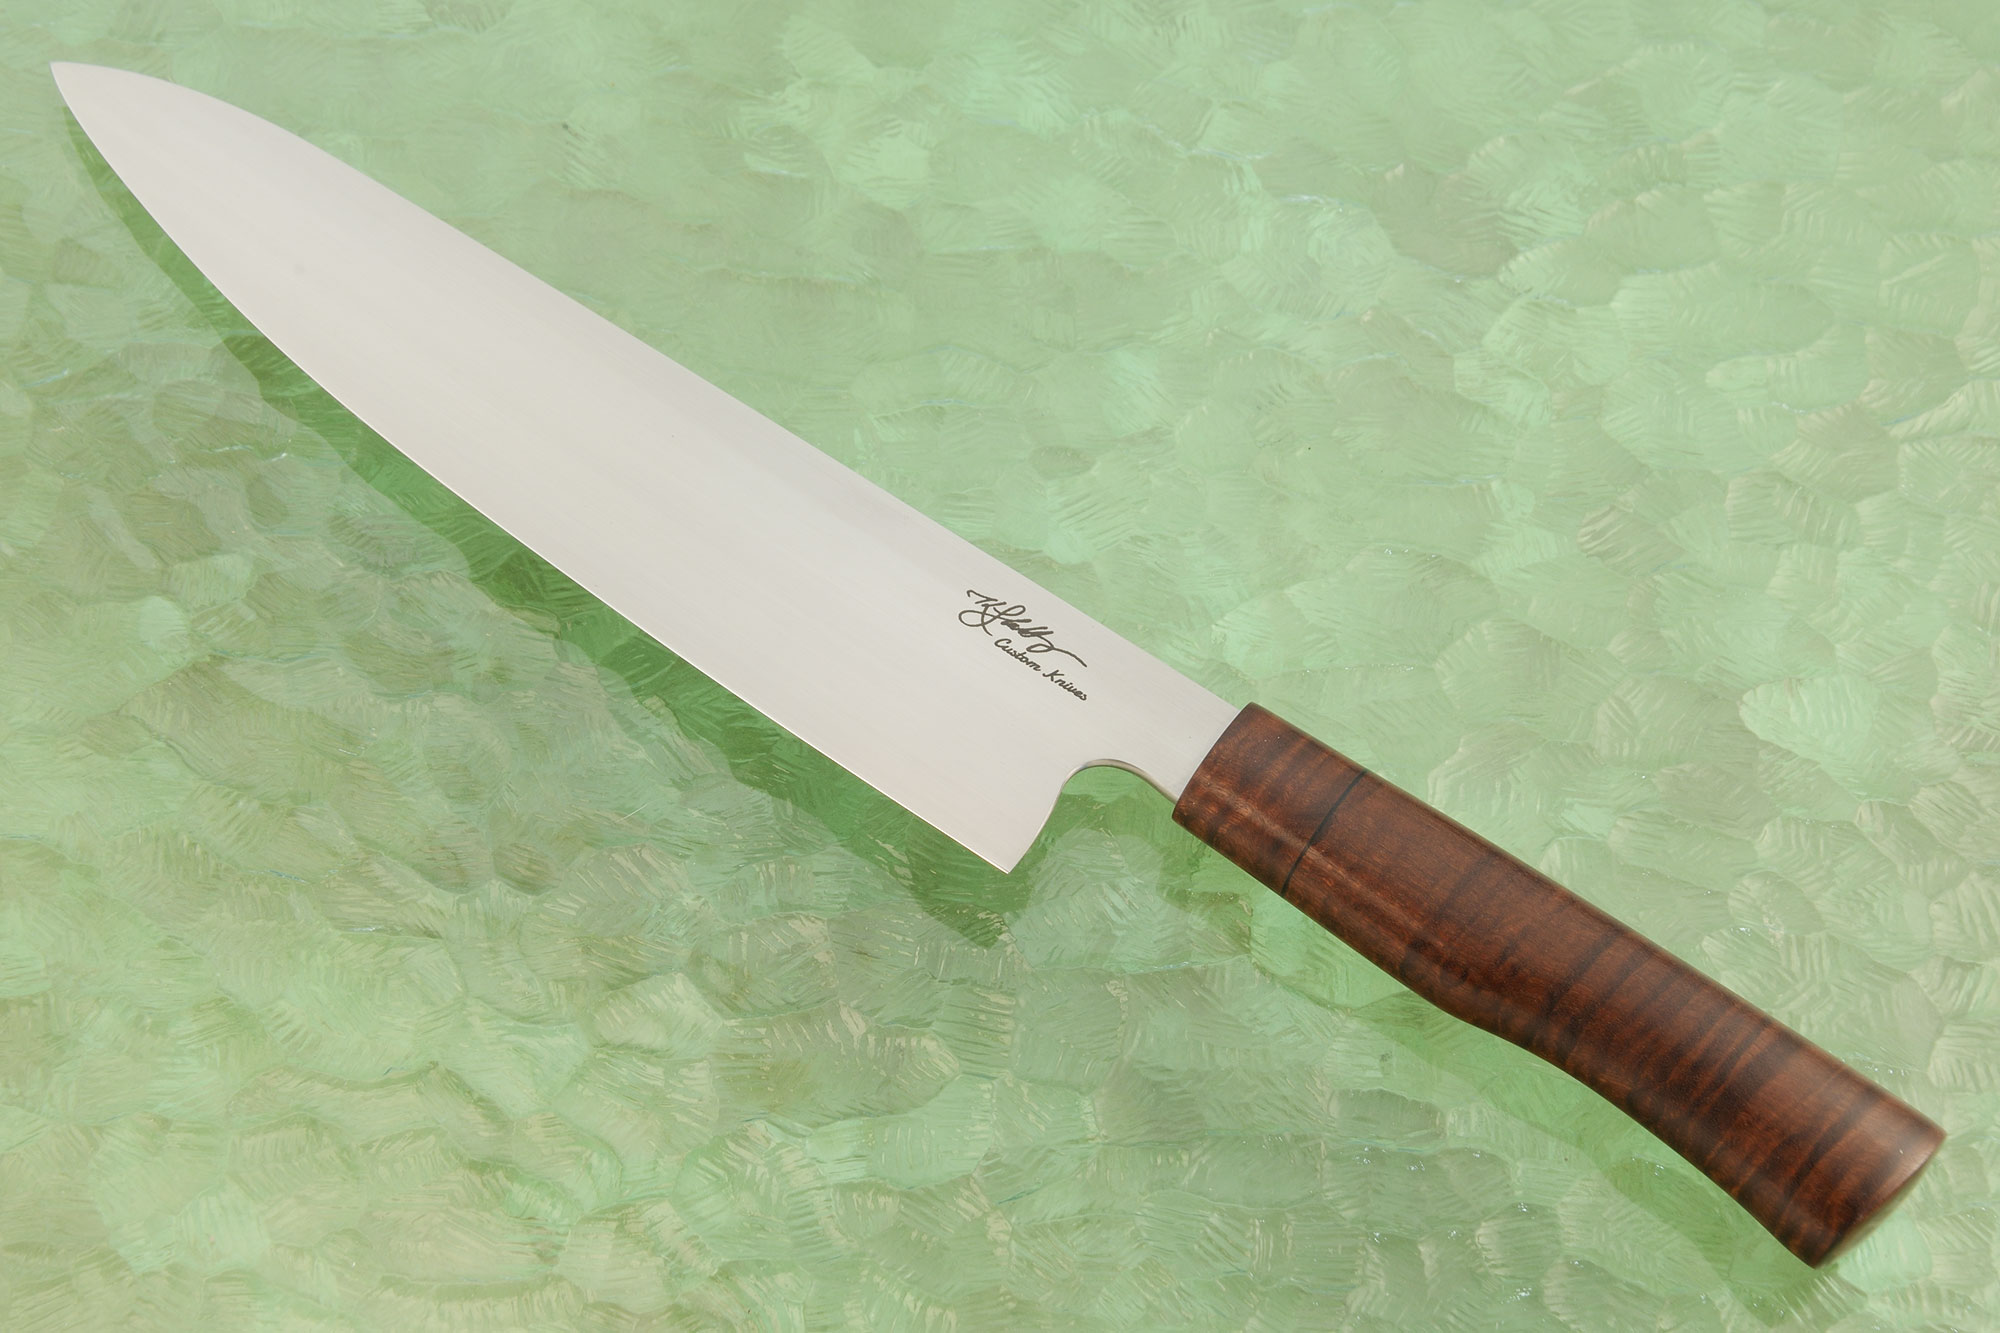 Epicurean Edge: Japanese and European professional chefs knives